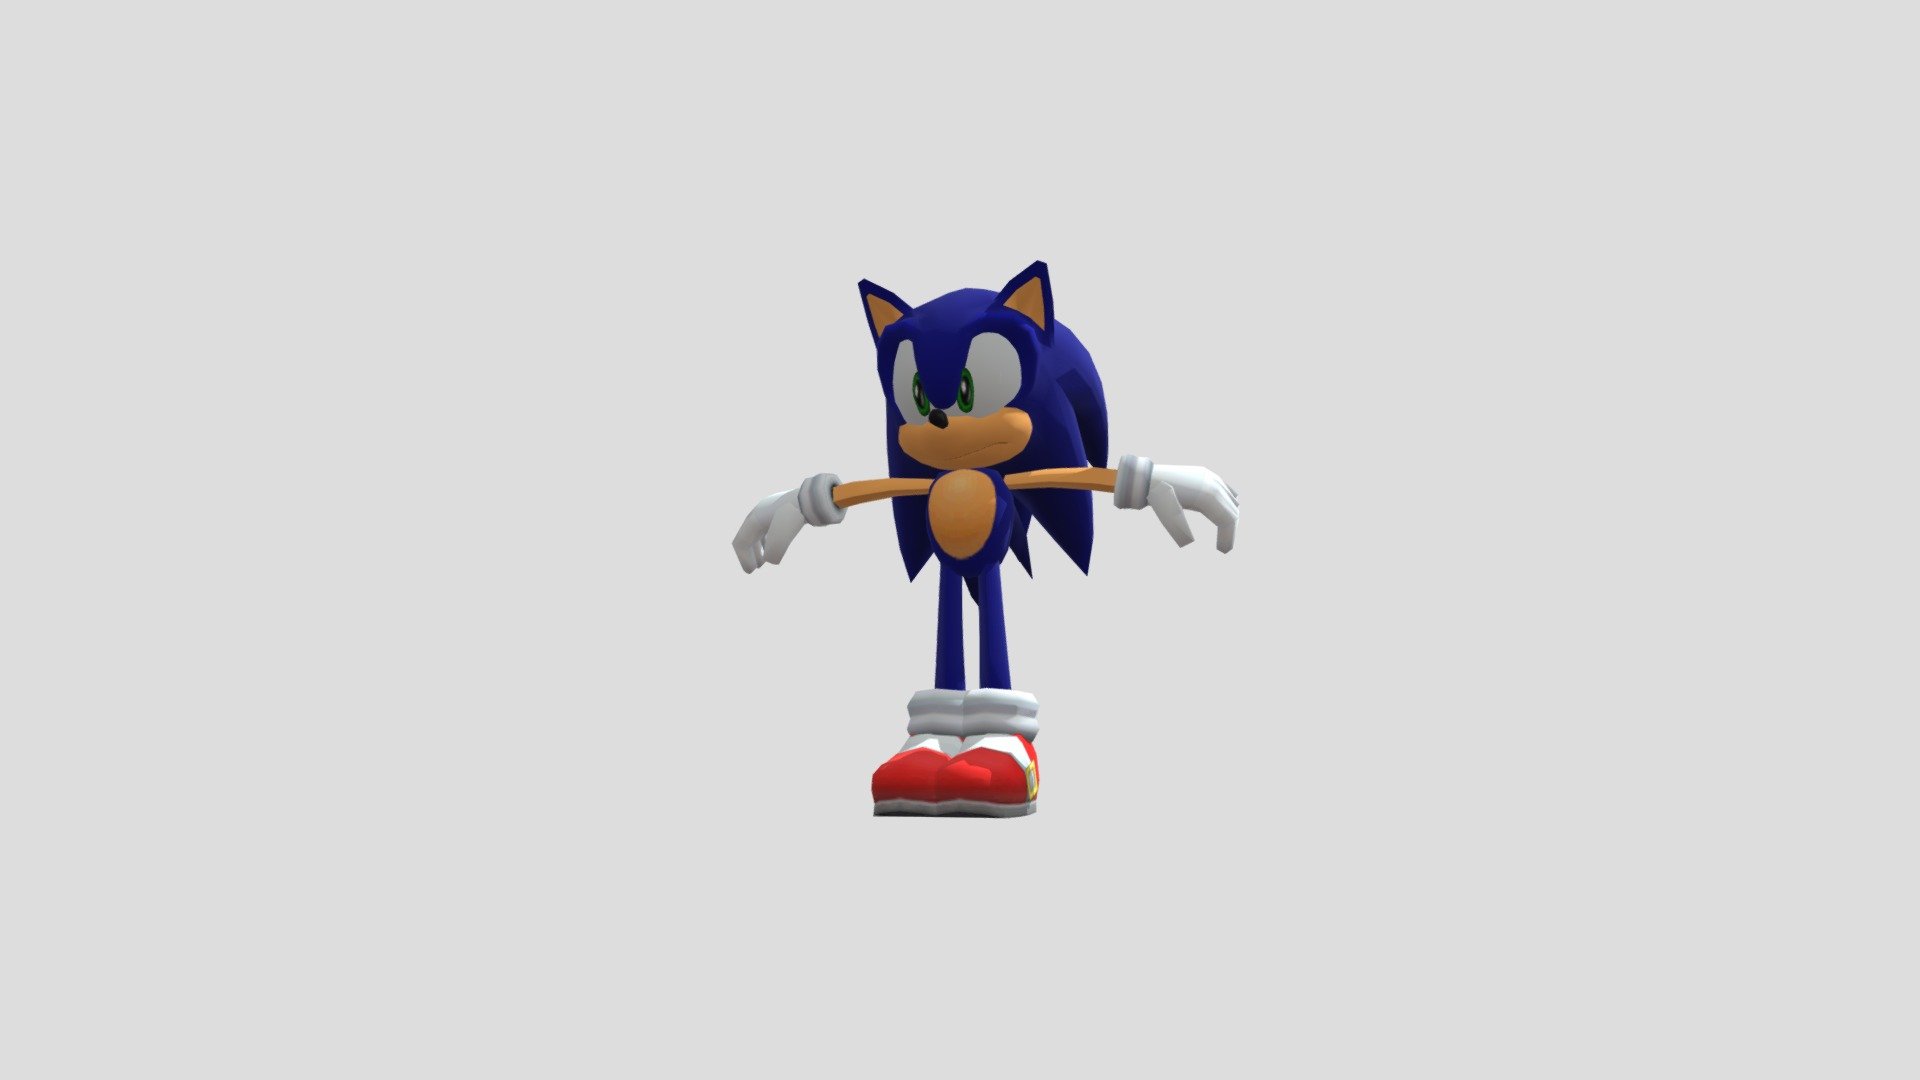 sonic adventure dx pc mouse camera